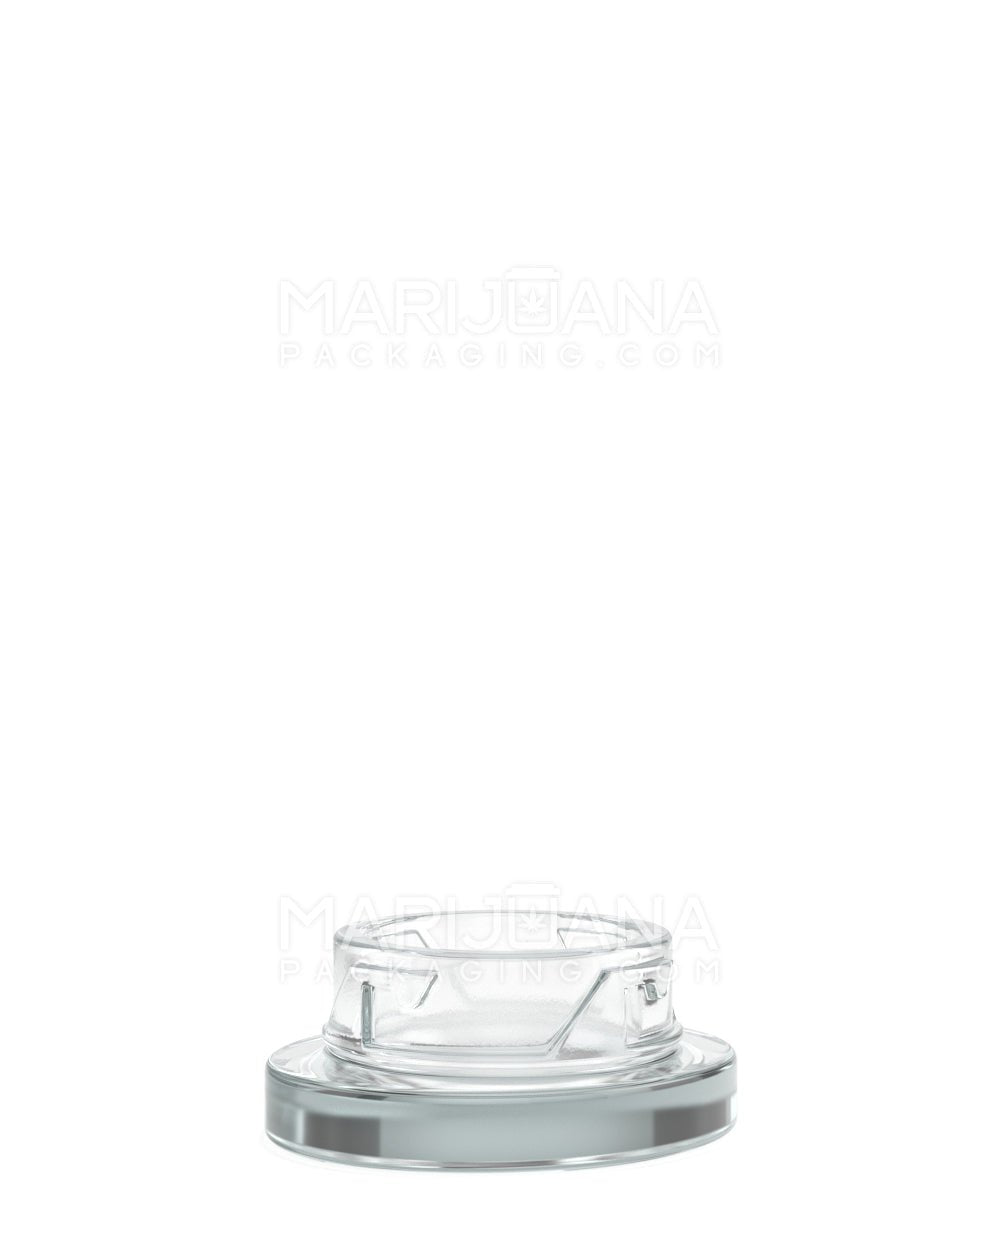 Child Resistant | Clear Glass Oval Concentrate Jar w/ Black Cap | 45mm - 5mL - 240 Count - 4